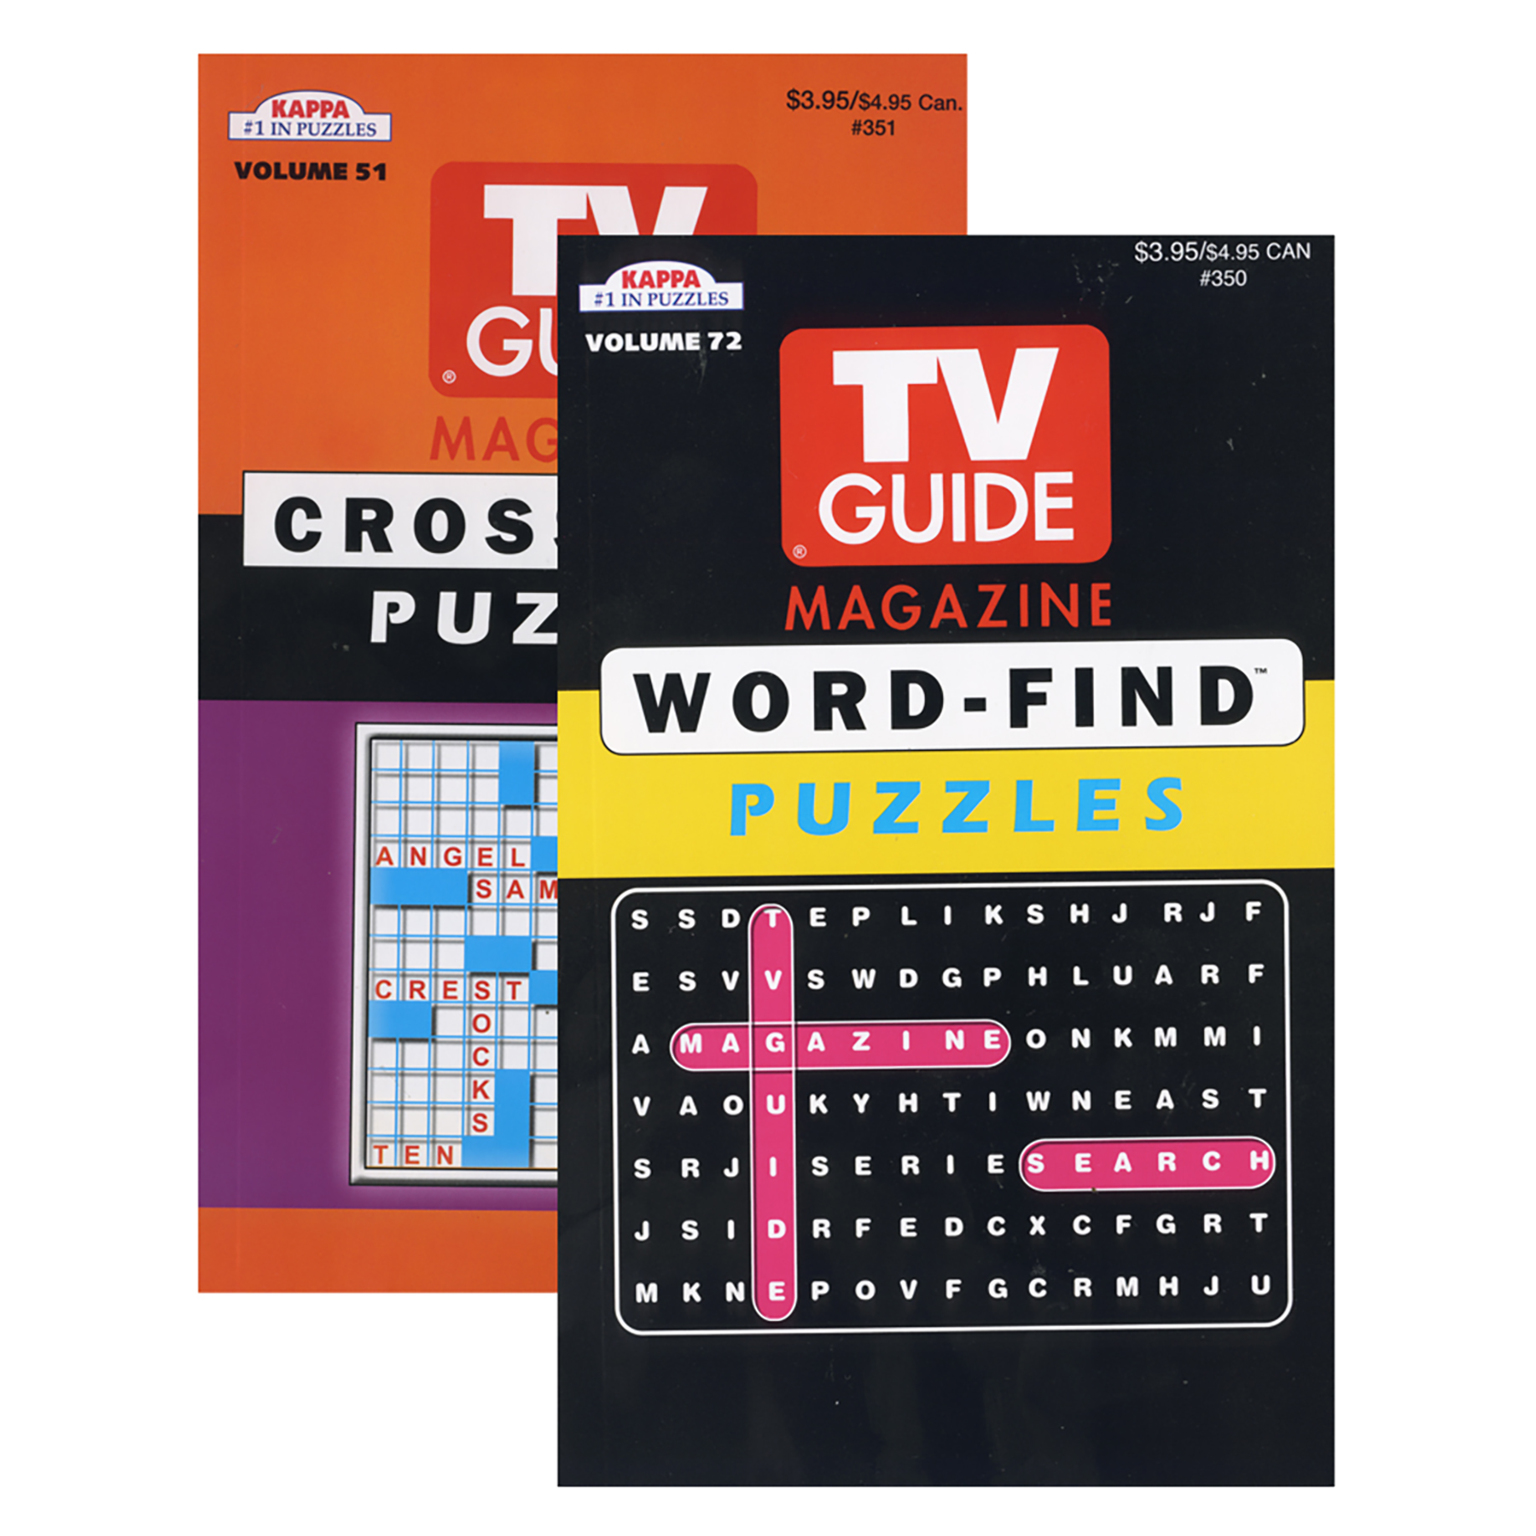 KAPPA TV Guide Word Finds Crossword Puzzles Book Digest Size